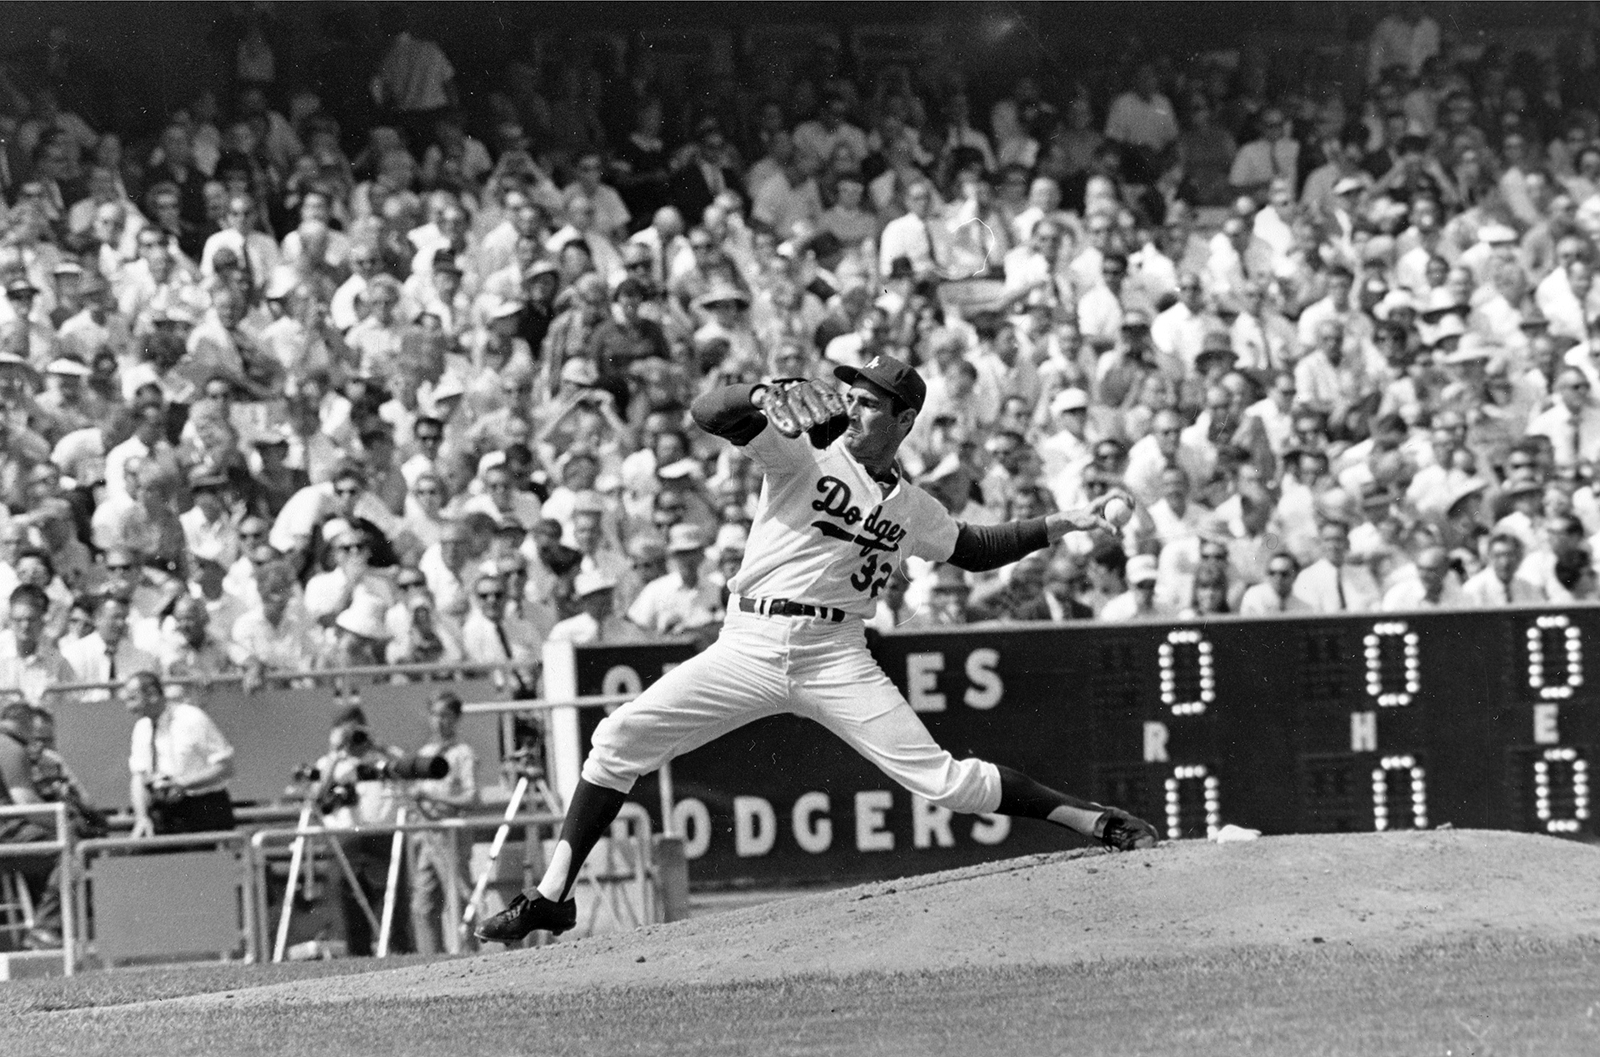 FILE - In this Oct. 6, 1966 file photo, Los Angeles Dodgers' Sandy Koufax pitches against the Baltimore Orioles in game two of the World Series baseball game in Los Angeles. In 1965, Koufax didn't pitch the Dodgers' Series opener at Minnesota because of Yom Kippur and lost to Jim Kaat the following day. Koufax pitched a four-hit shutout on three days' rest to win Game 5, then came back with a three-hit shutout on two days' rest to win Game 7. (AP Photo/File)